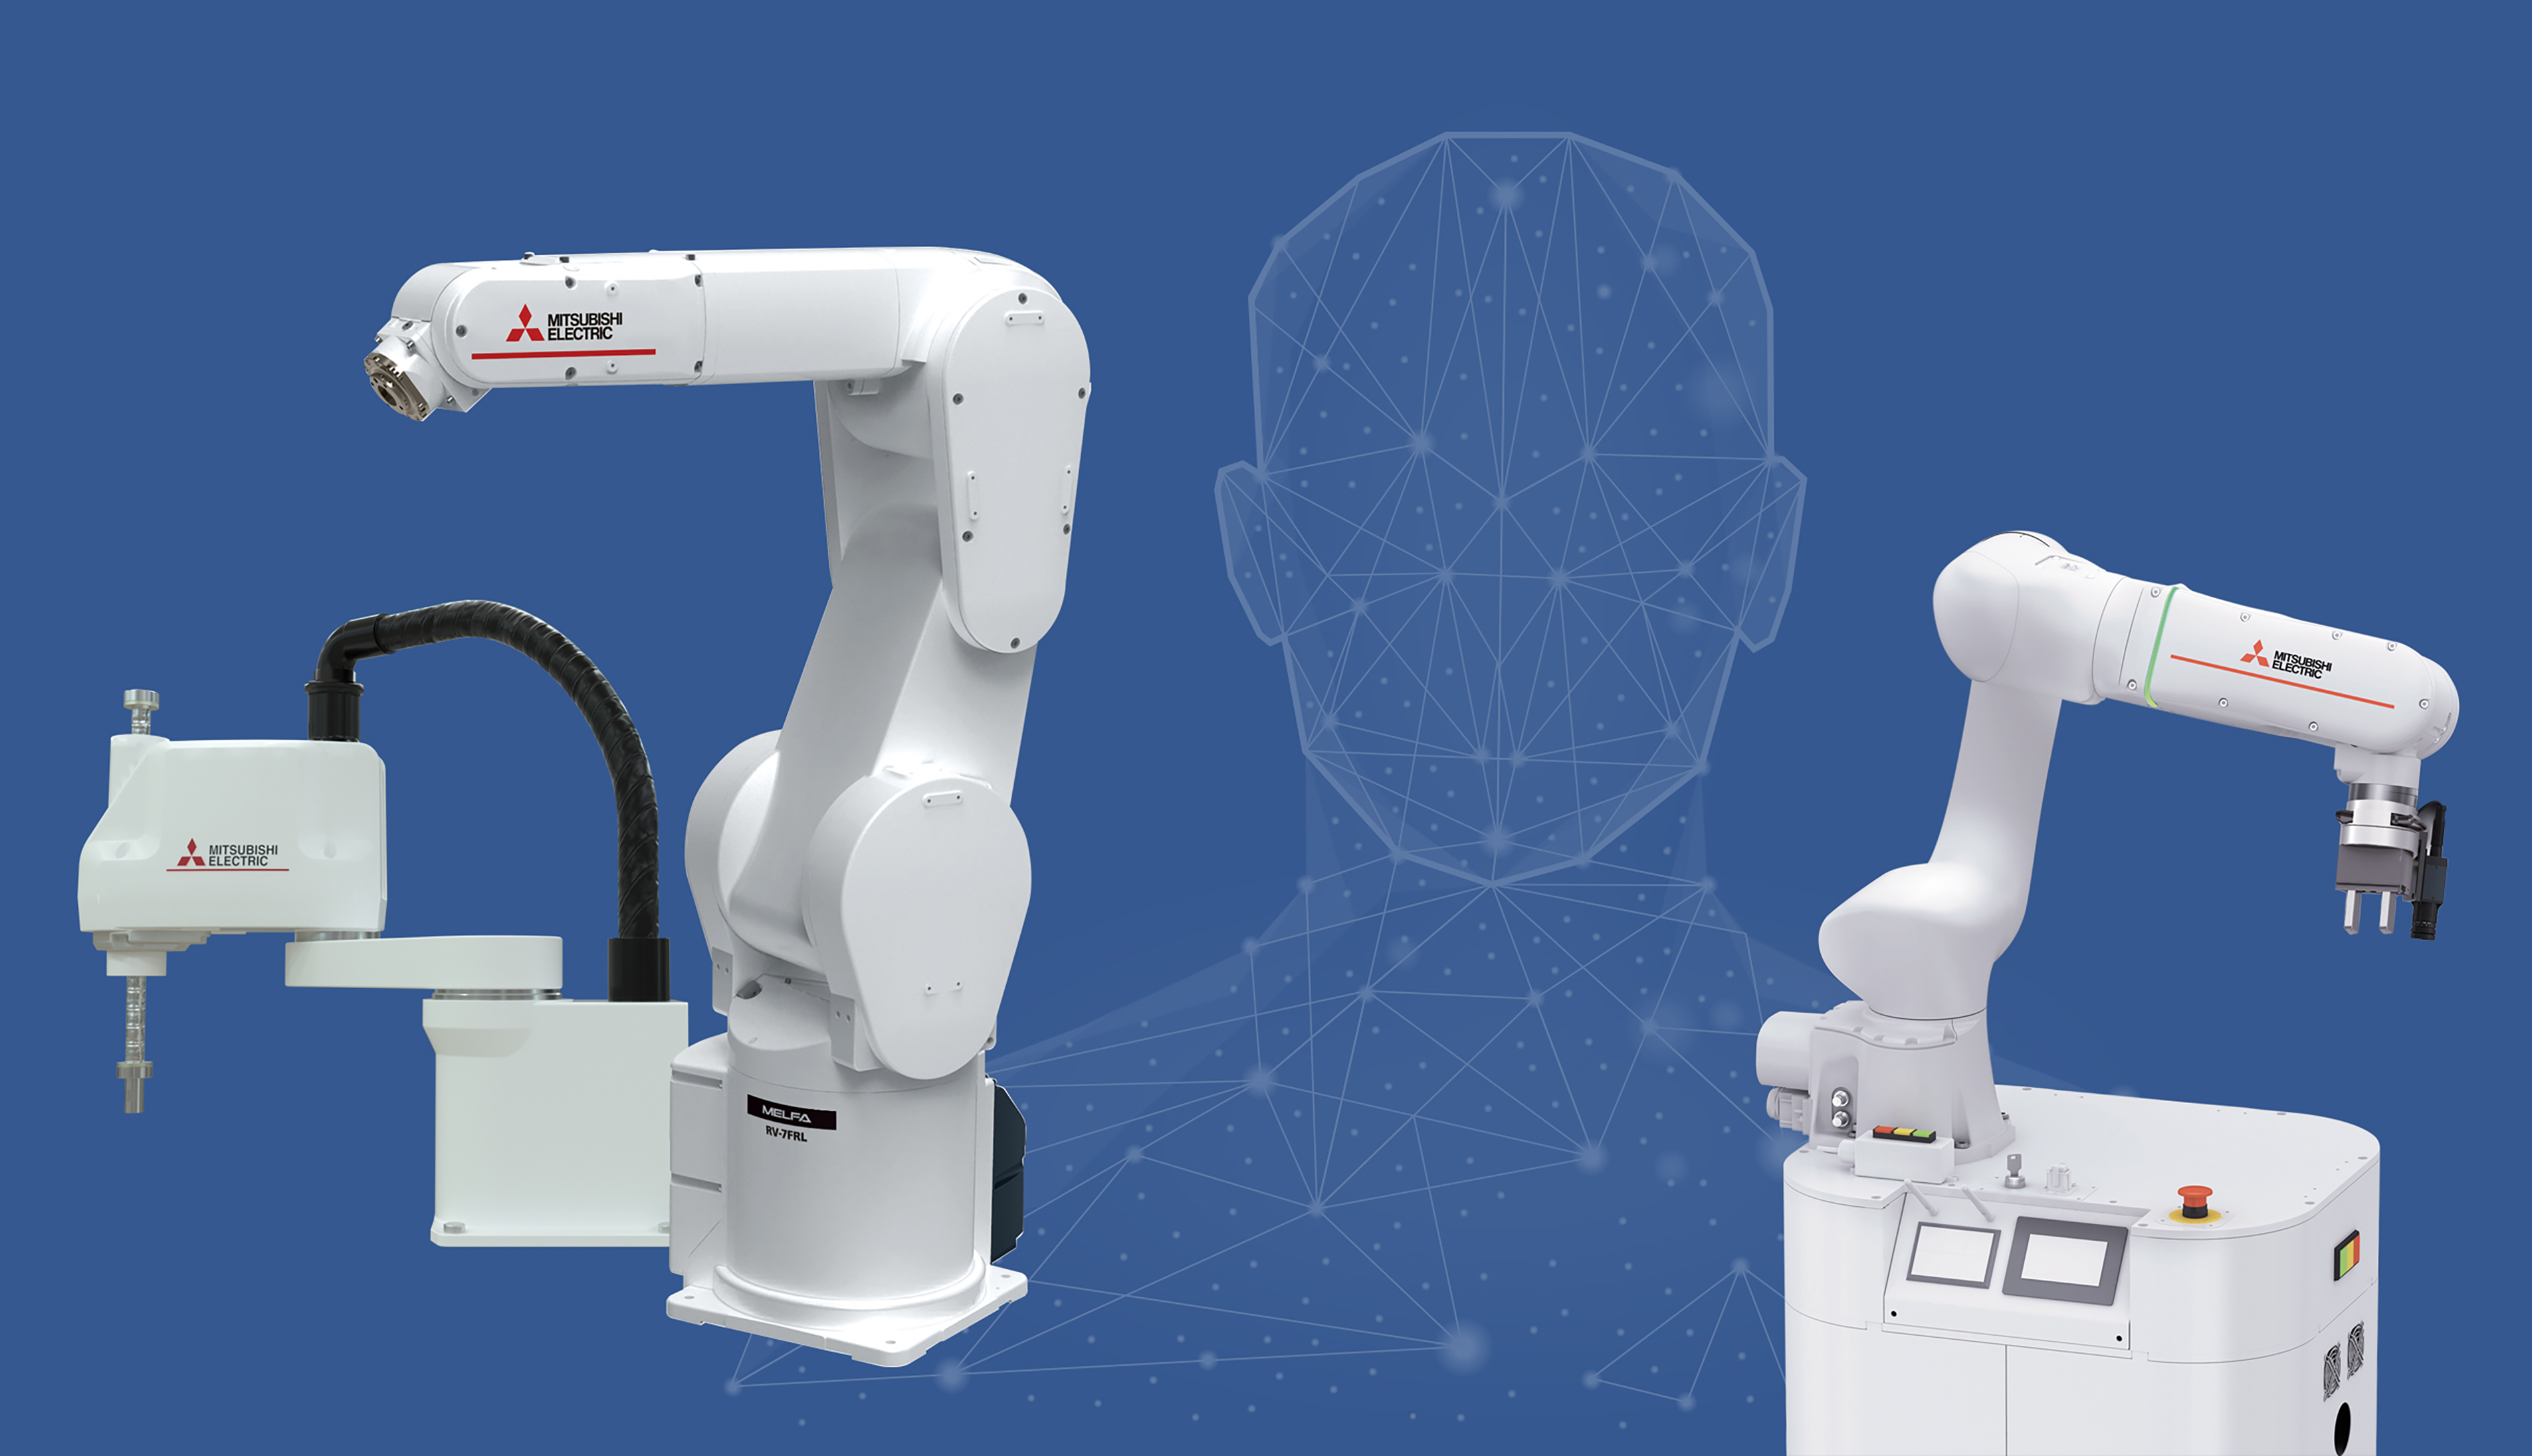 Visitors to the Mitsubishi Electric’s booth will be able to interact with three different robotic applications [Source: Mitsubishi Electric Europe B.V.]